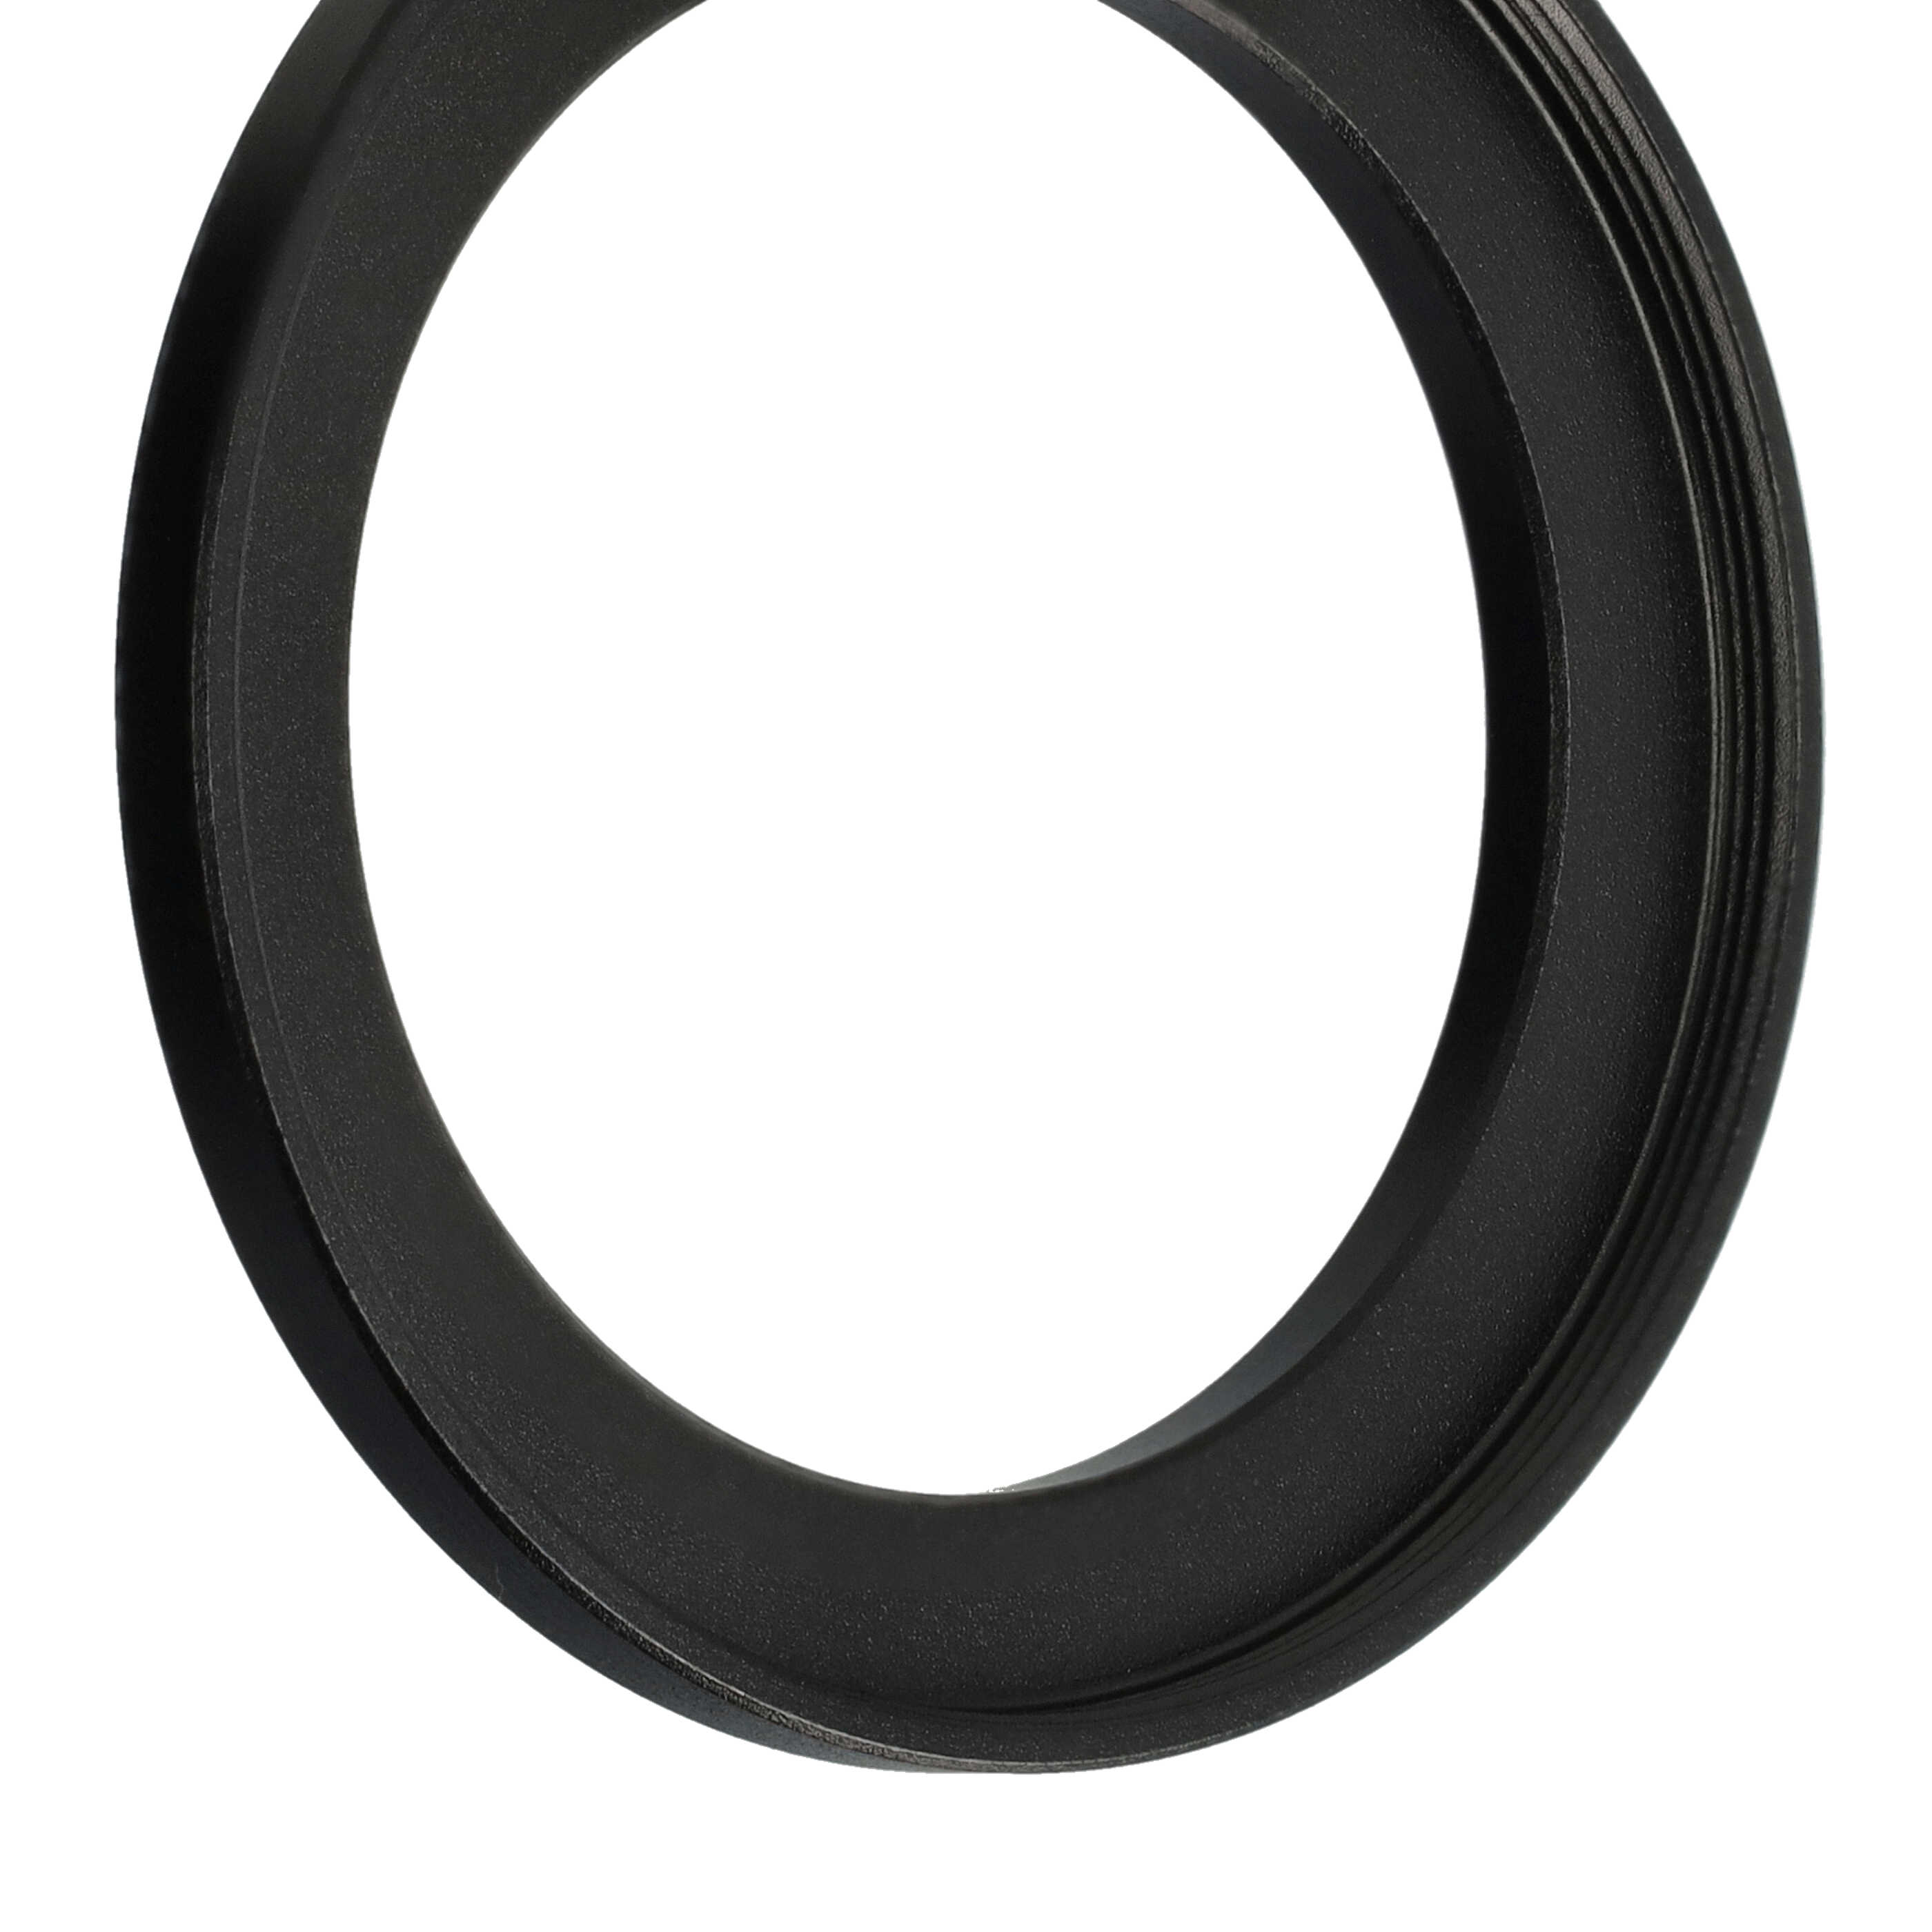 Step-Up Ring Adapter of 43 mm to 52 mmfor various Camera Lens - Filter Adapter